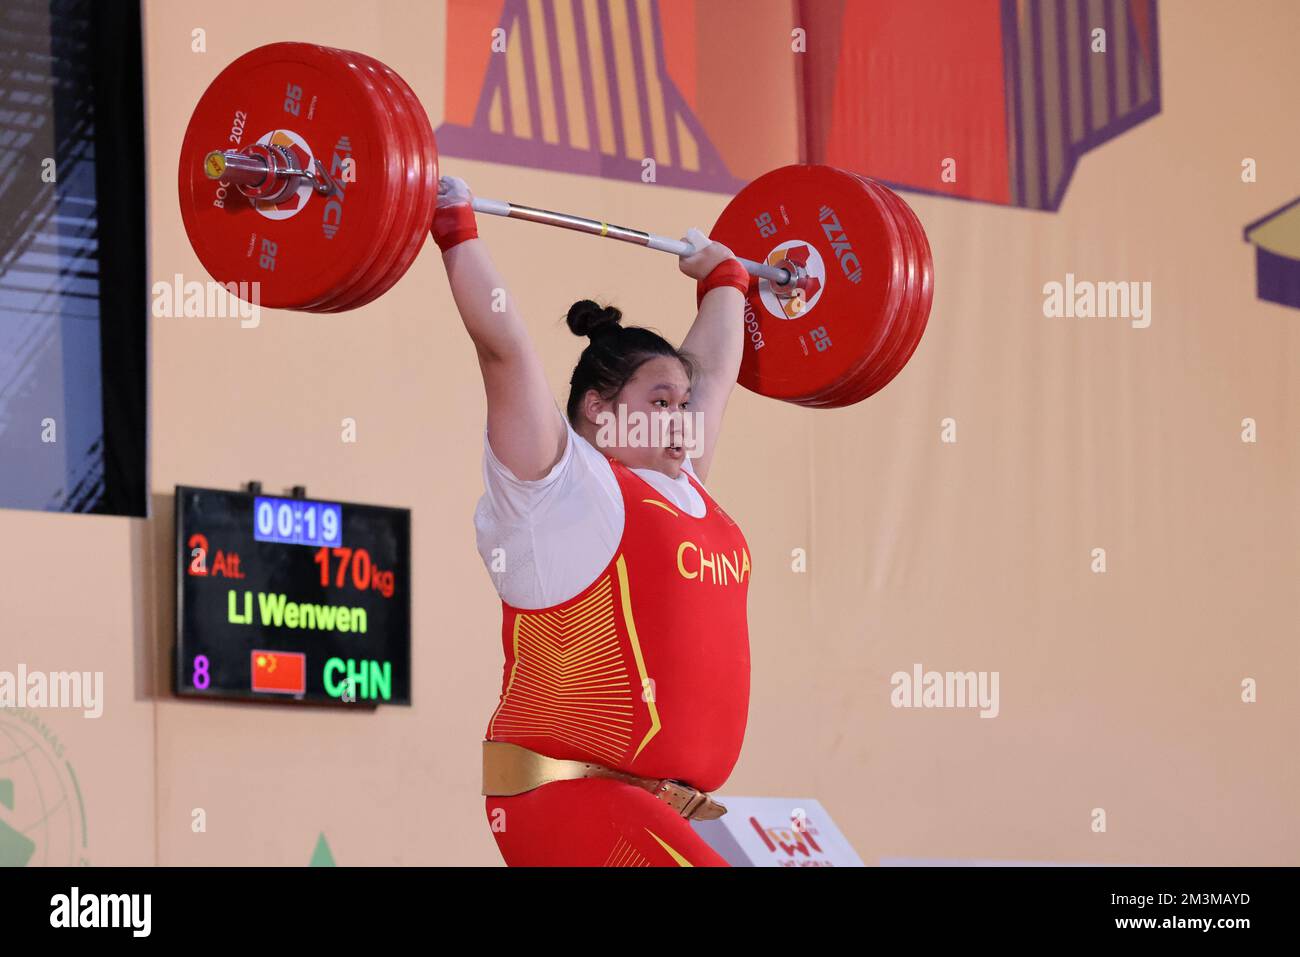 Bogota, Colombia. 15th Dec, 2022. Li Wenwen of China competes during the womens 87kg clean and jerk event at the 2022 World Weightlifting Championships in Bogota, Colombia, Dec